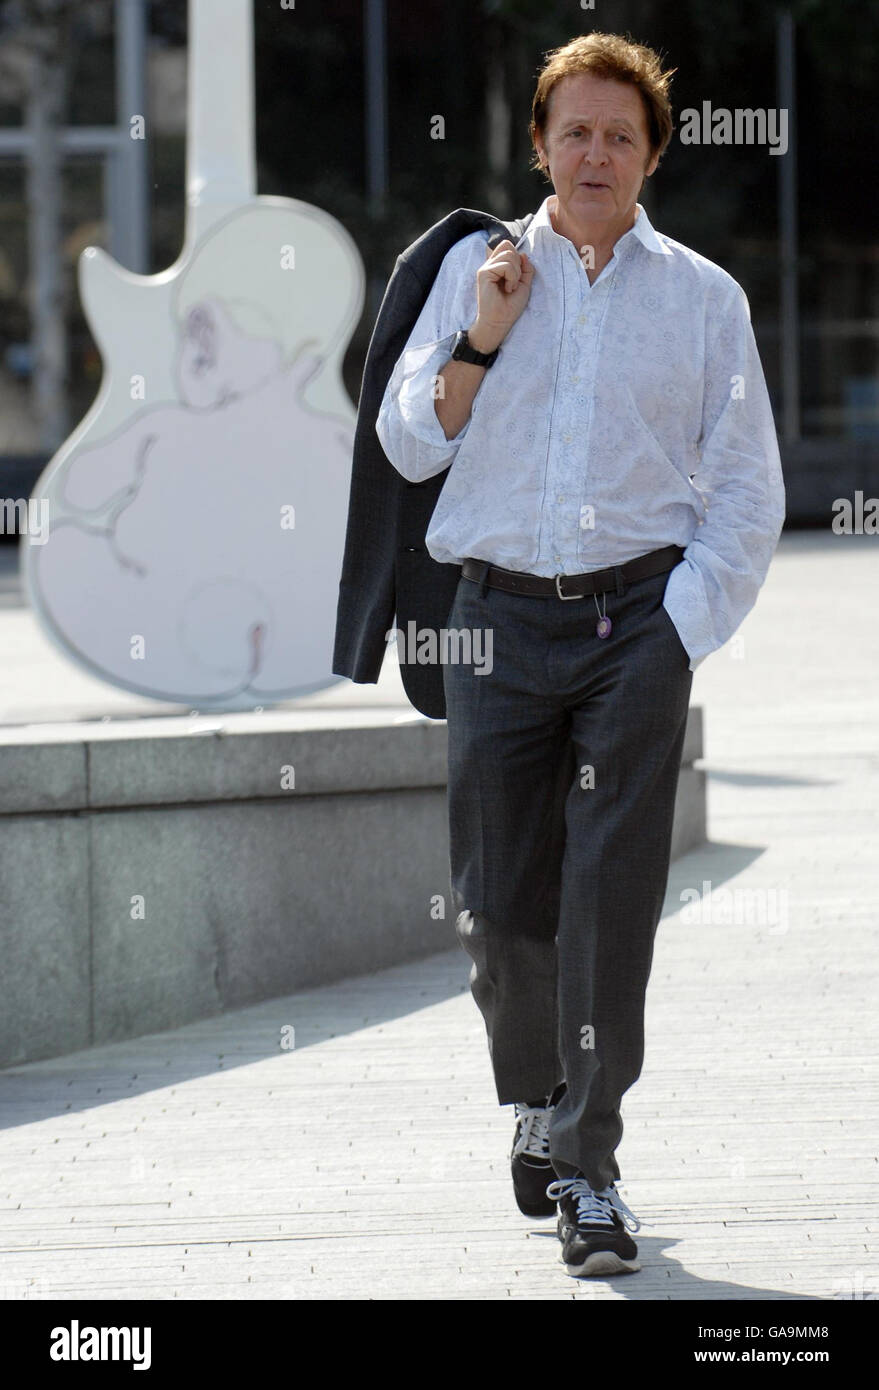 Sir Paul McCartney arrives to sign a 10ft high Les Paul Guitar sculpture in central London, painted by artist Rosie Brooks, which forms part of an exhibition at London's City Hall. Stock Photo